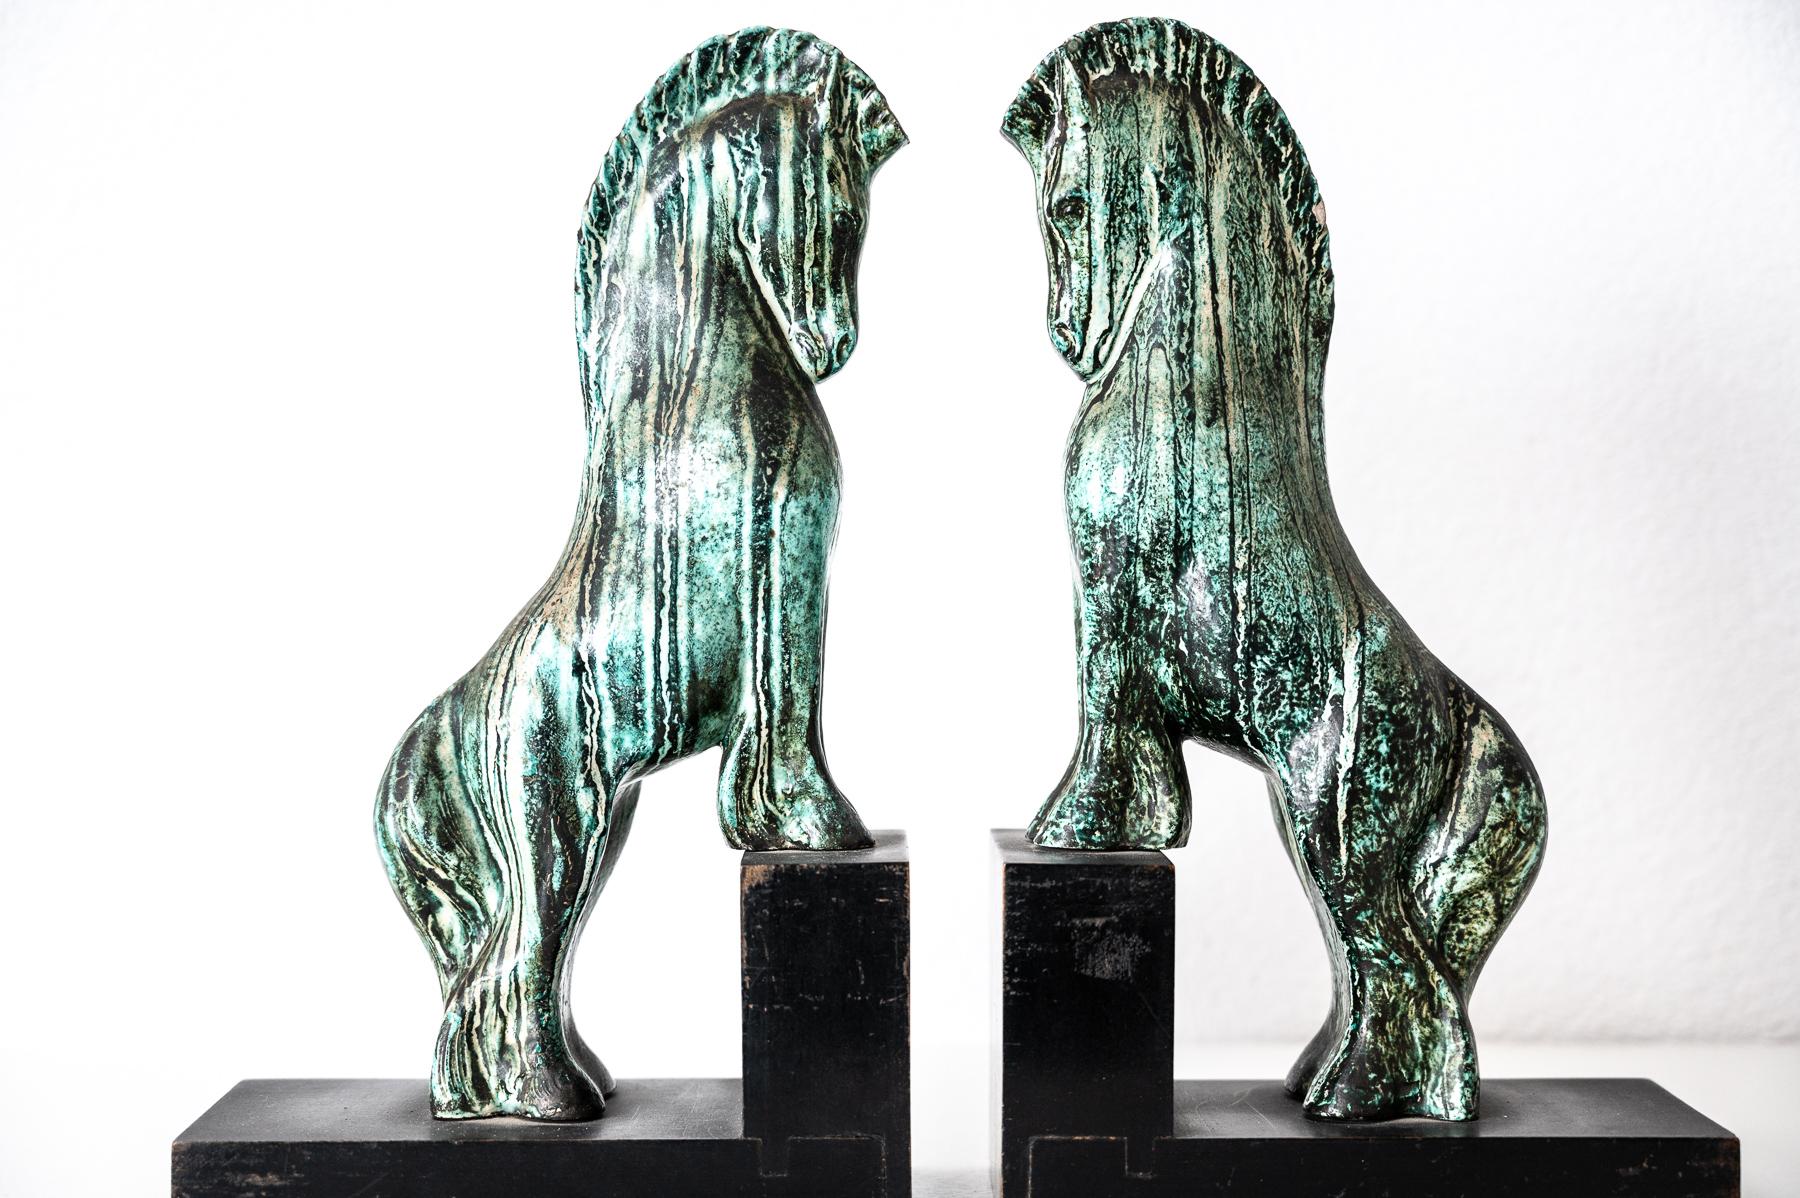 A pair of bookends by  Guido Cacciapuo featuring stoneware horses enameled in green. 
Signature engraved on horses: G. Cacciapuoti
made between  1930-1940.
Italy (priced for the pair)
Bibliography: AA.VV. Le ceramiche di Cacciapuoti da Napoli a